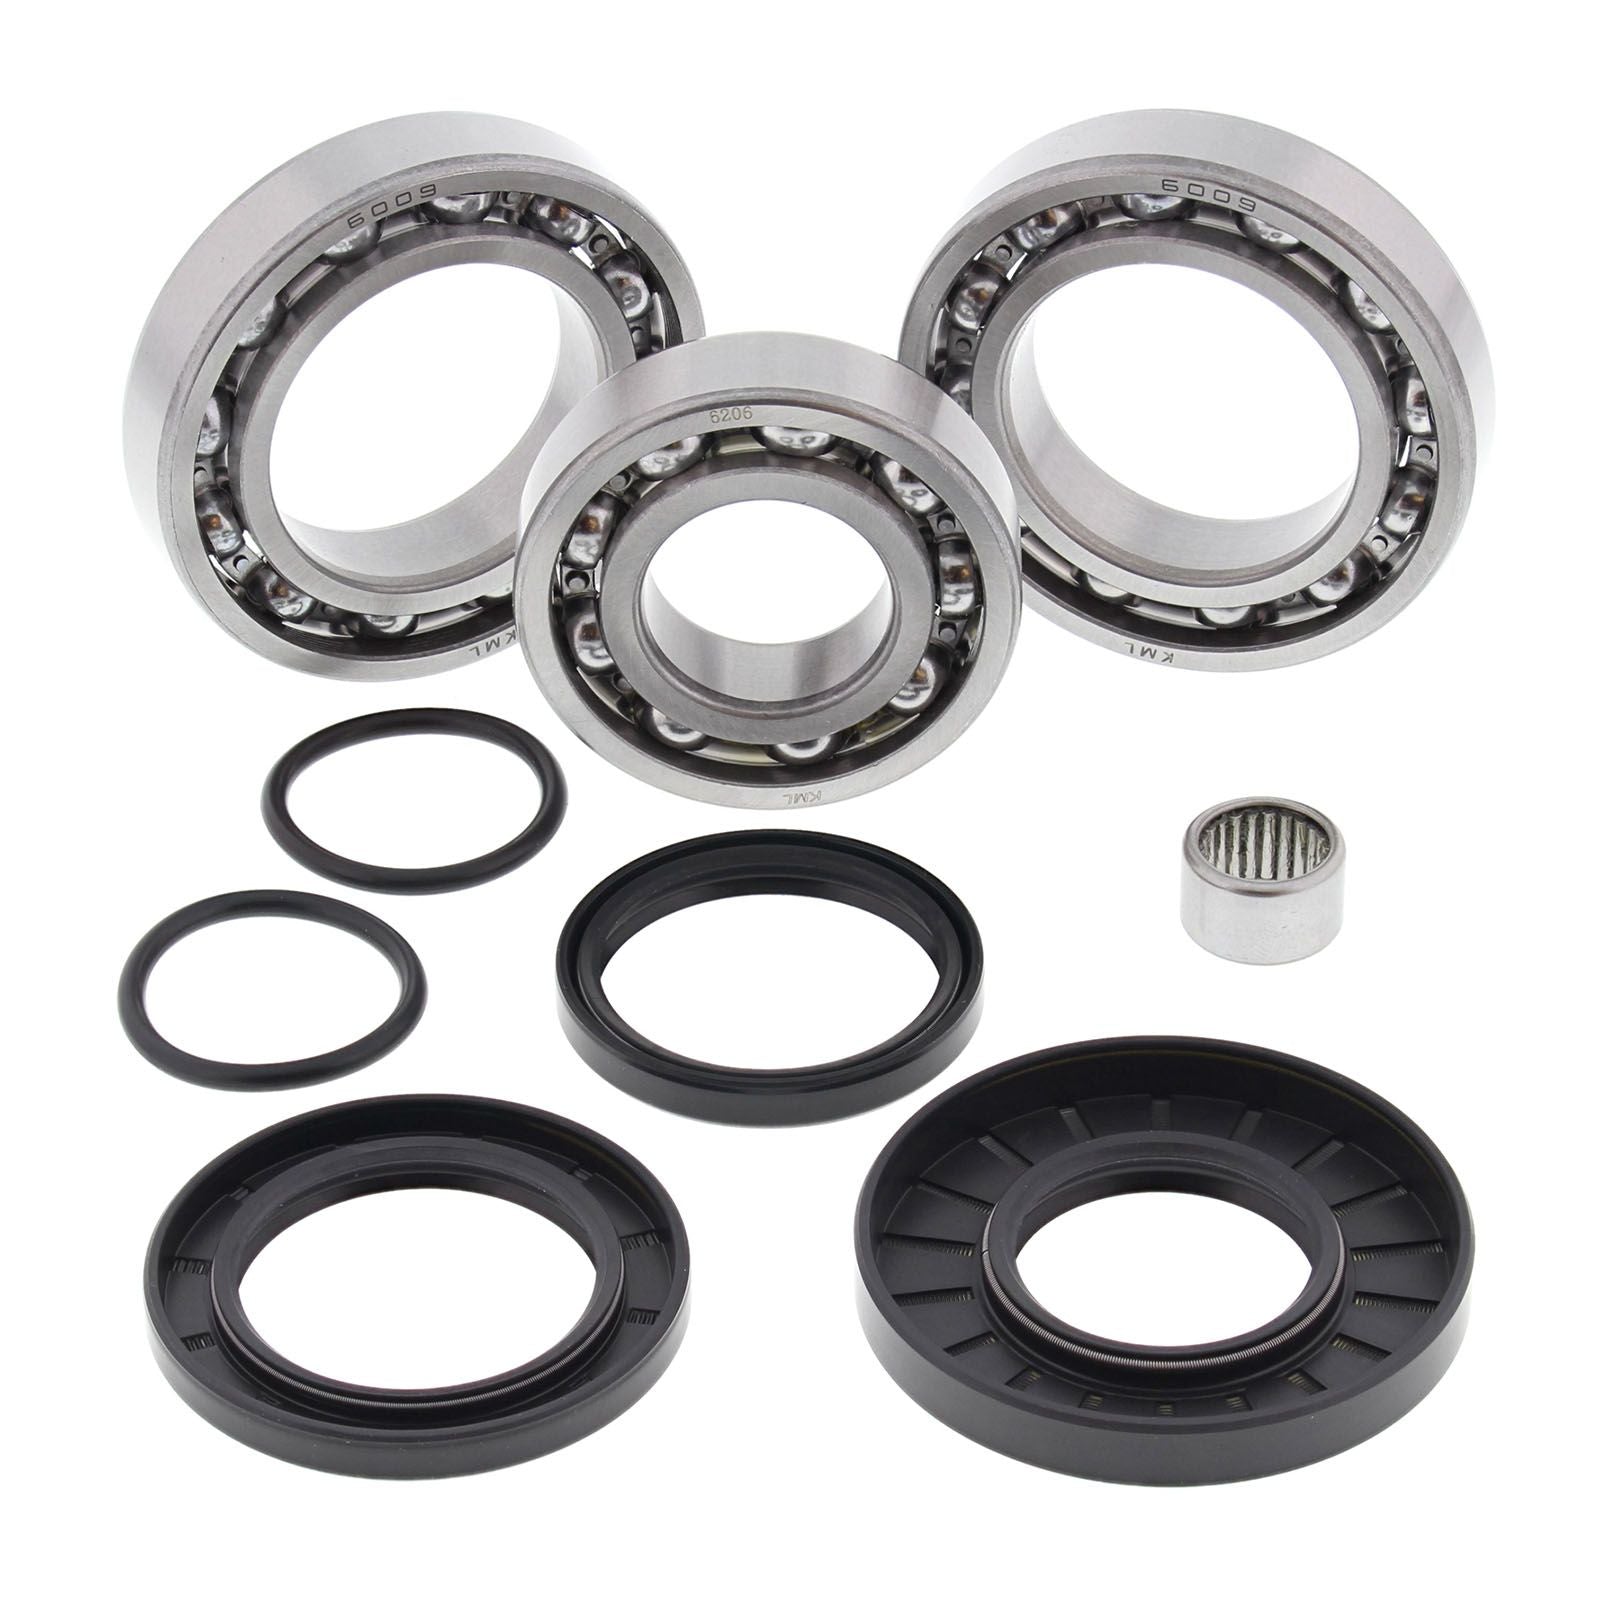 New ALL BALLS Racing Differential Bearing Kit #AB252102